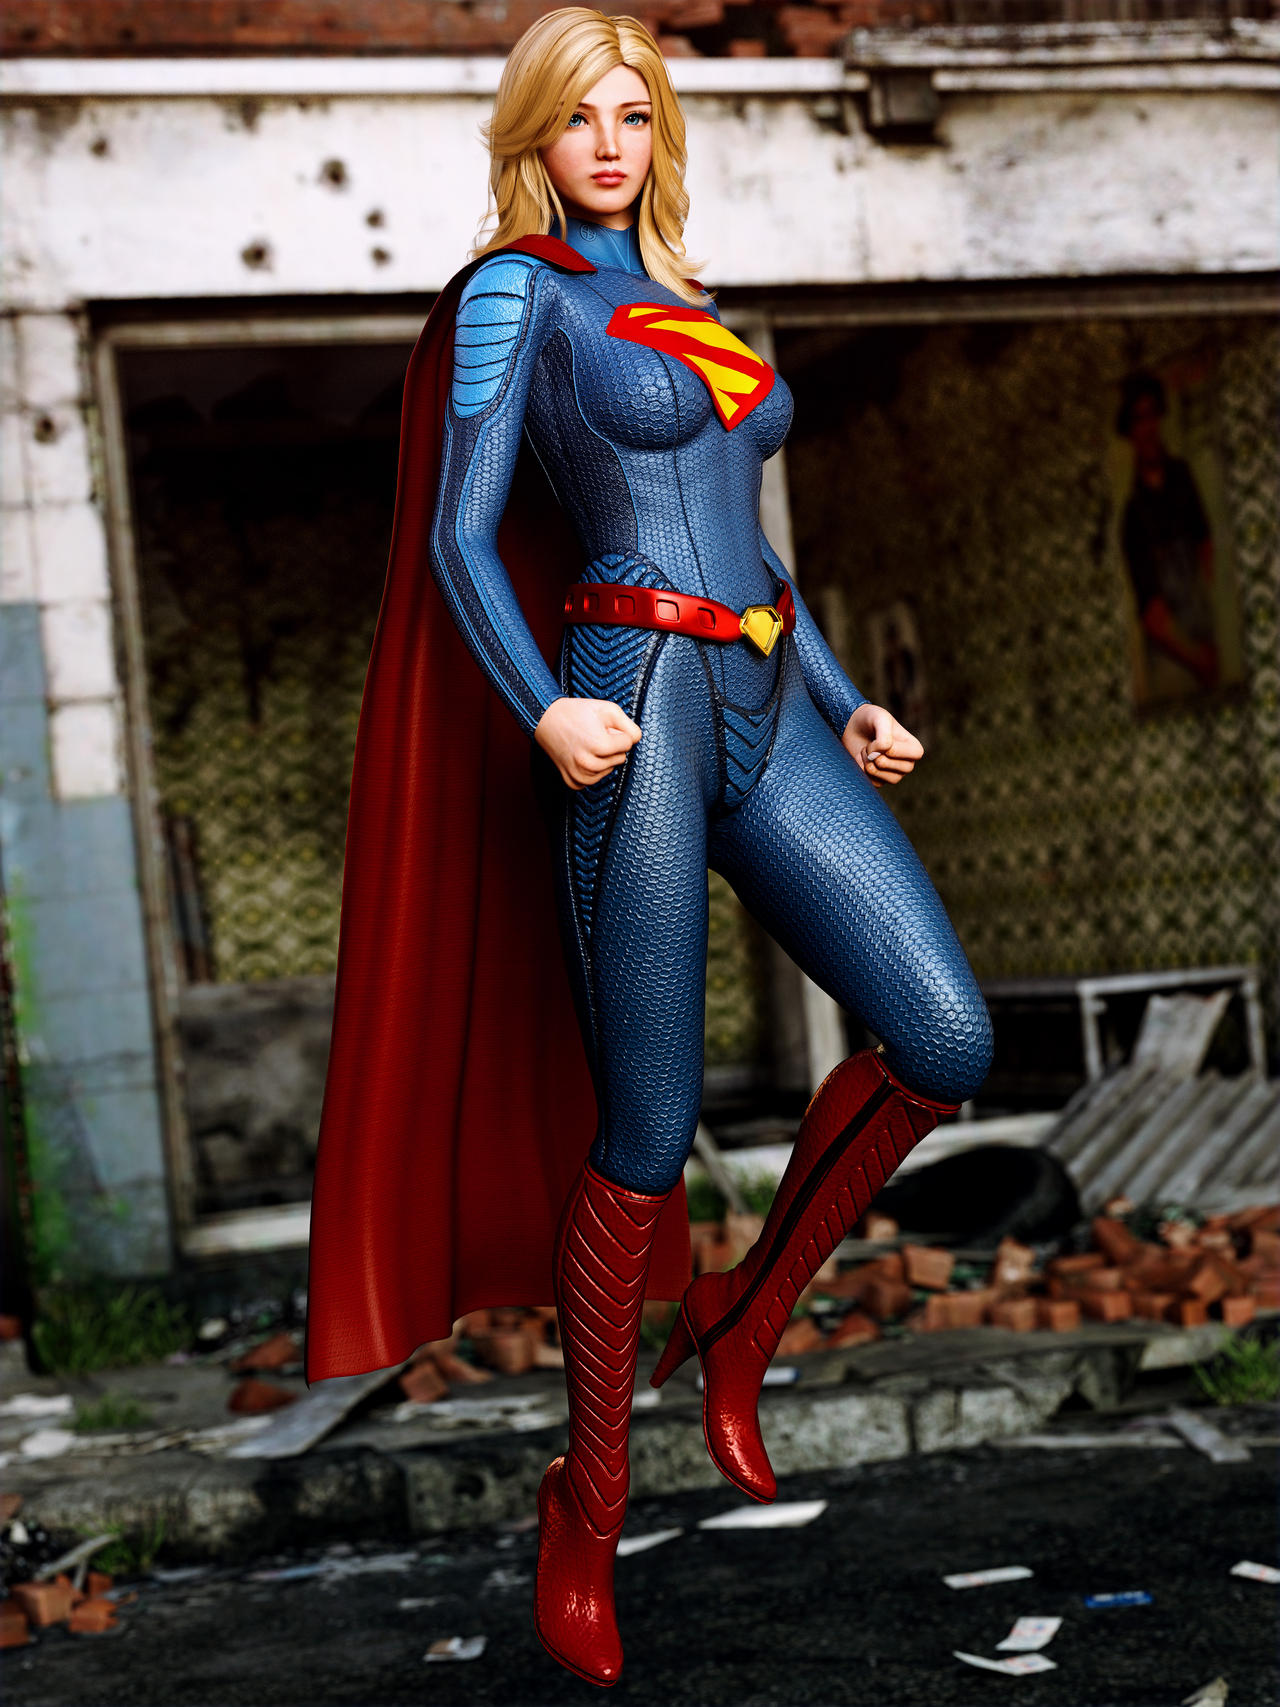 rebirth-supergirl-by-le-arc-7thheaven-on-deviantart